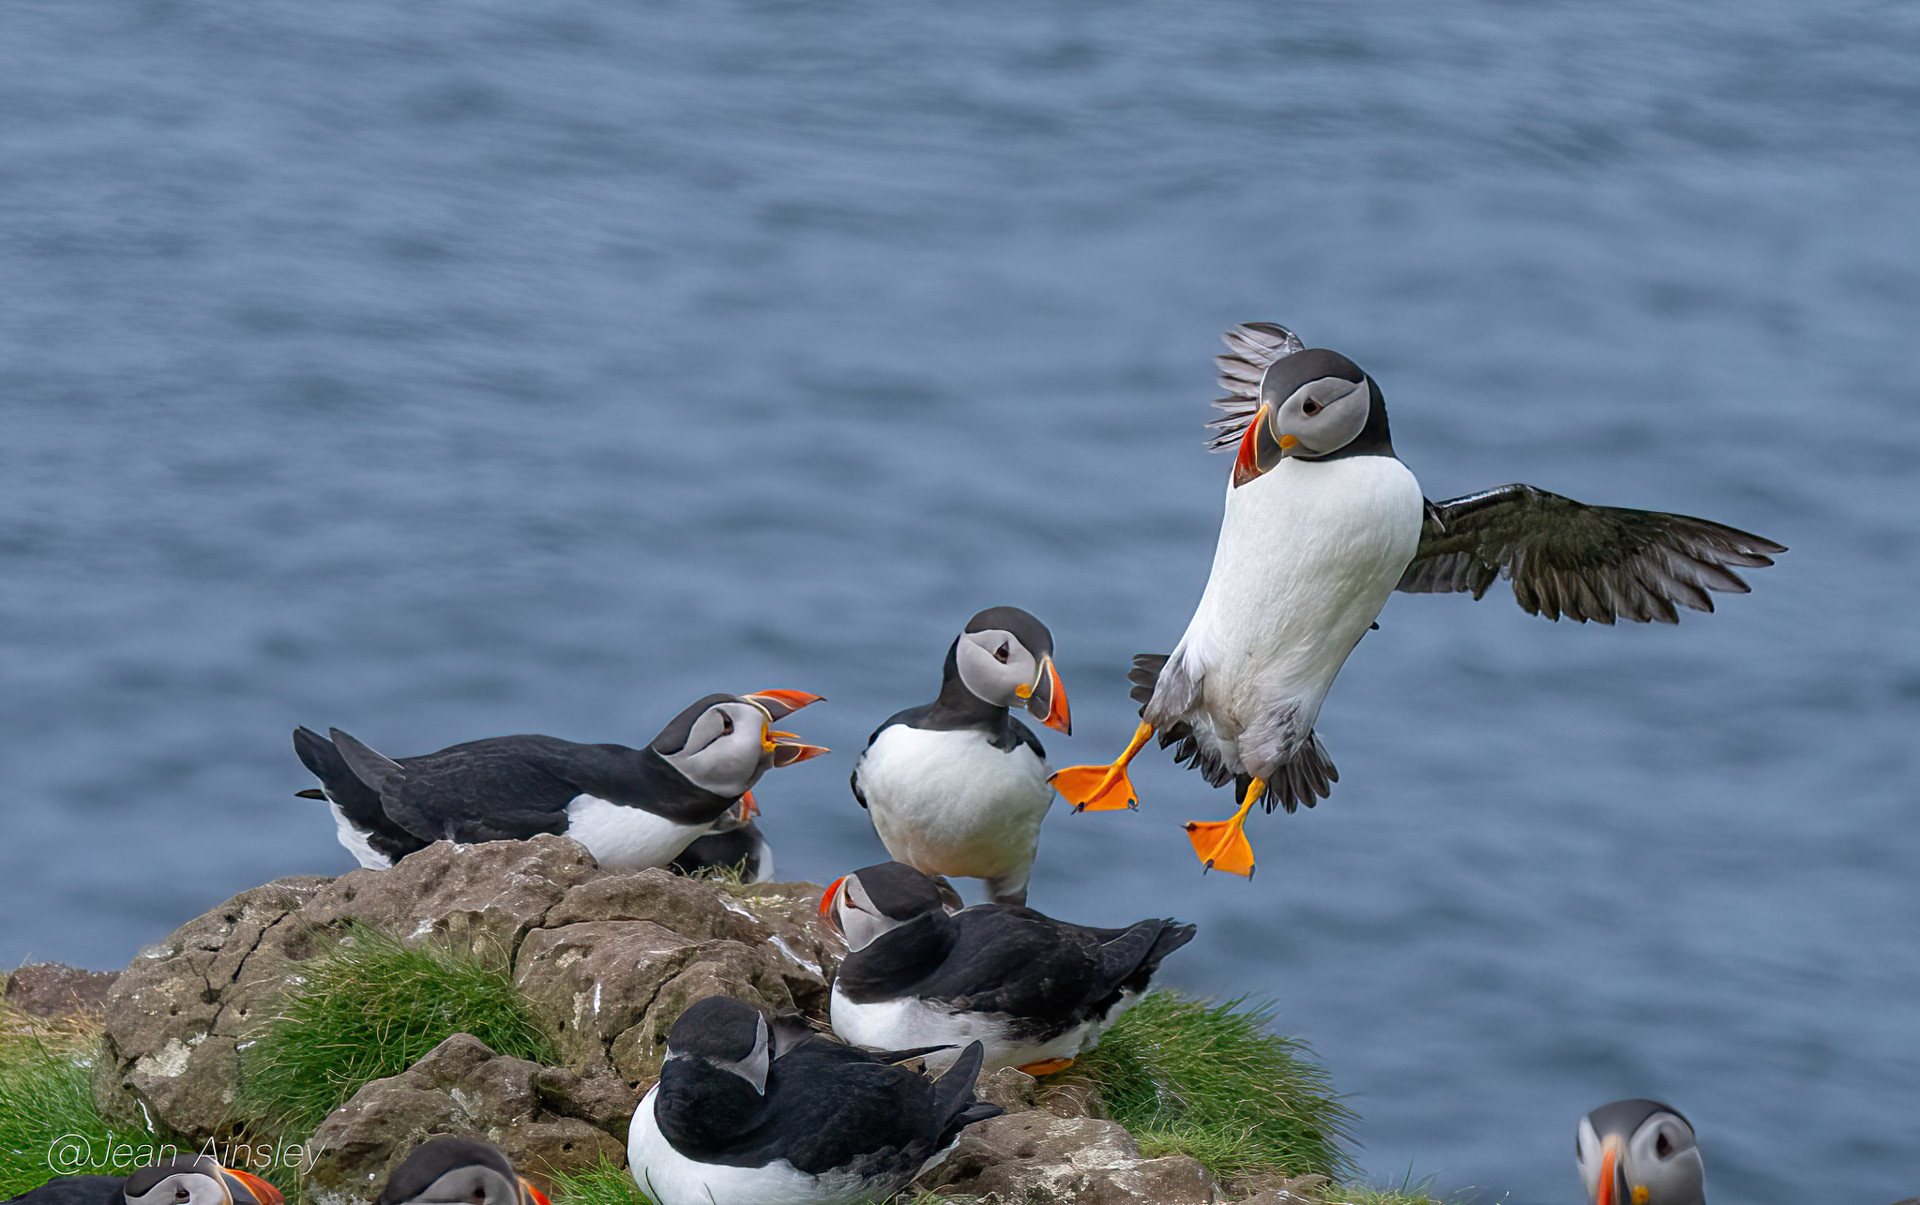 Background image - Flying Puffin 2